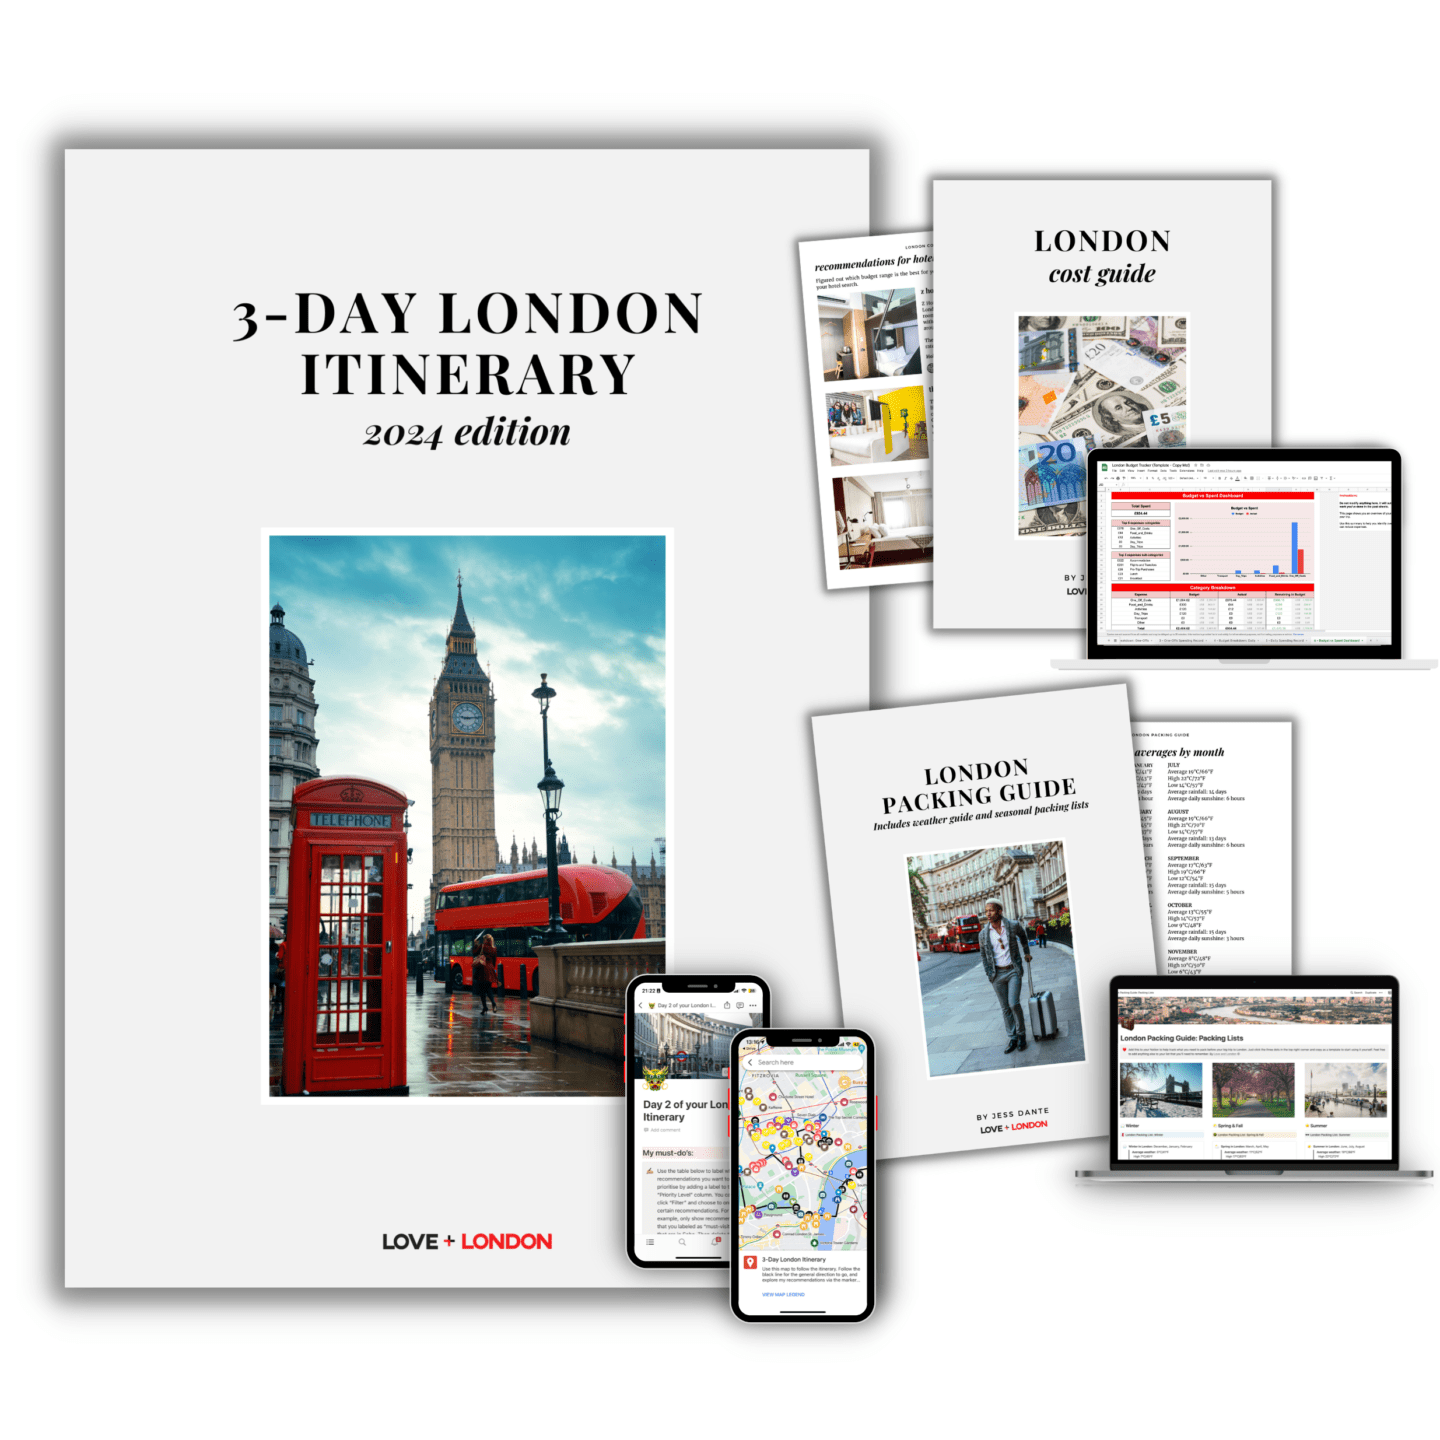 Image of contents of the 3-Day London Itinerary including a Packing & Spending Guide 